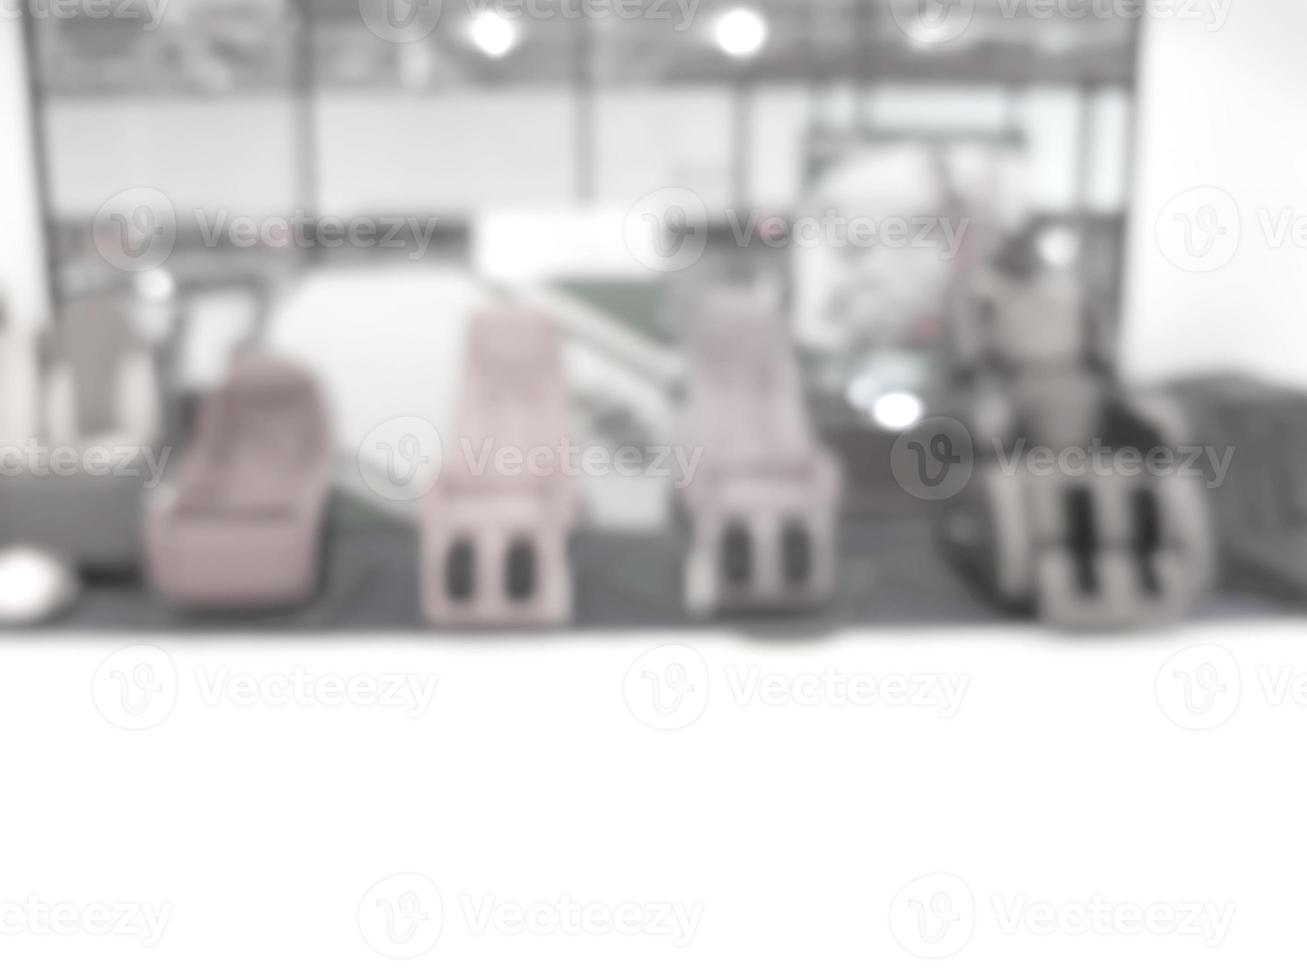 Blurry showroom massage chairs background of illustration,Abstract Blurred Image photo